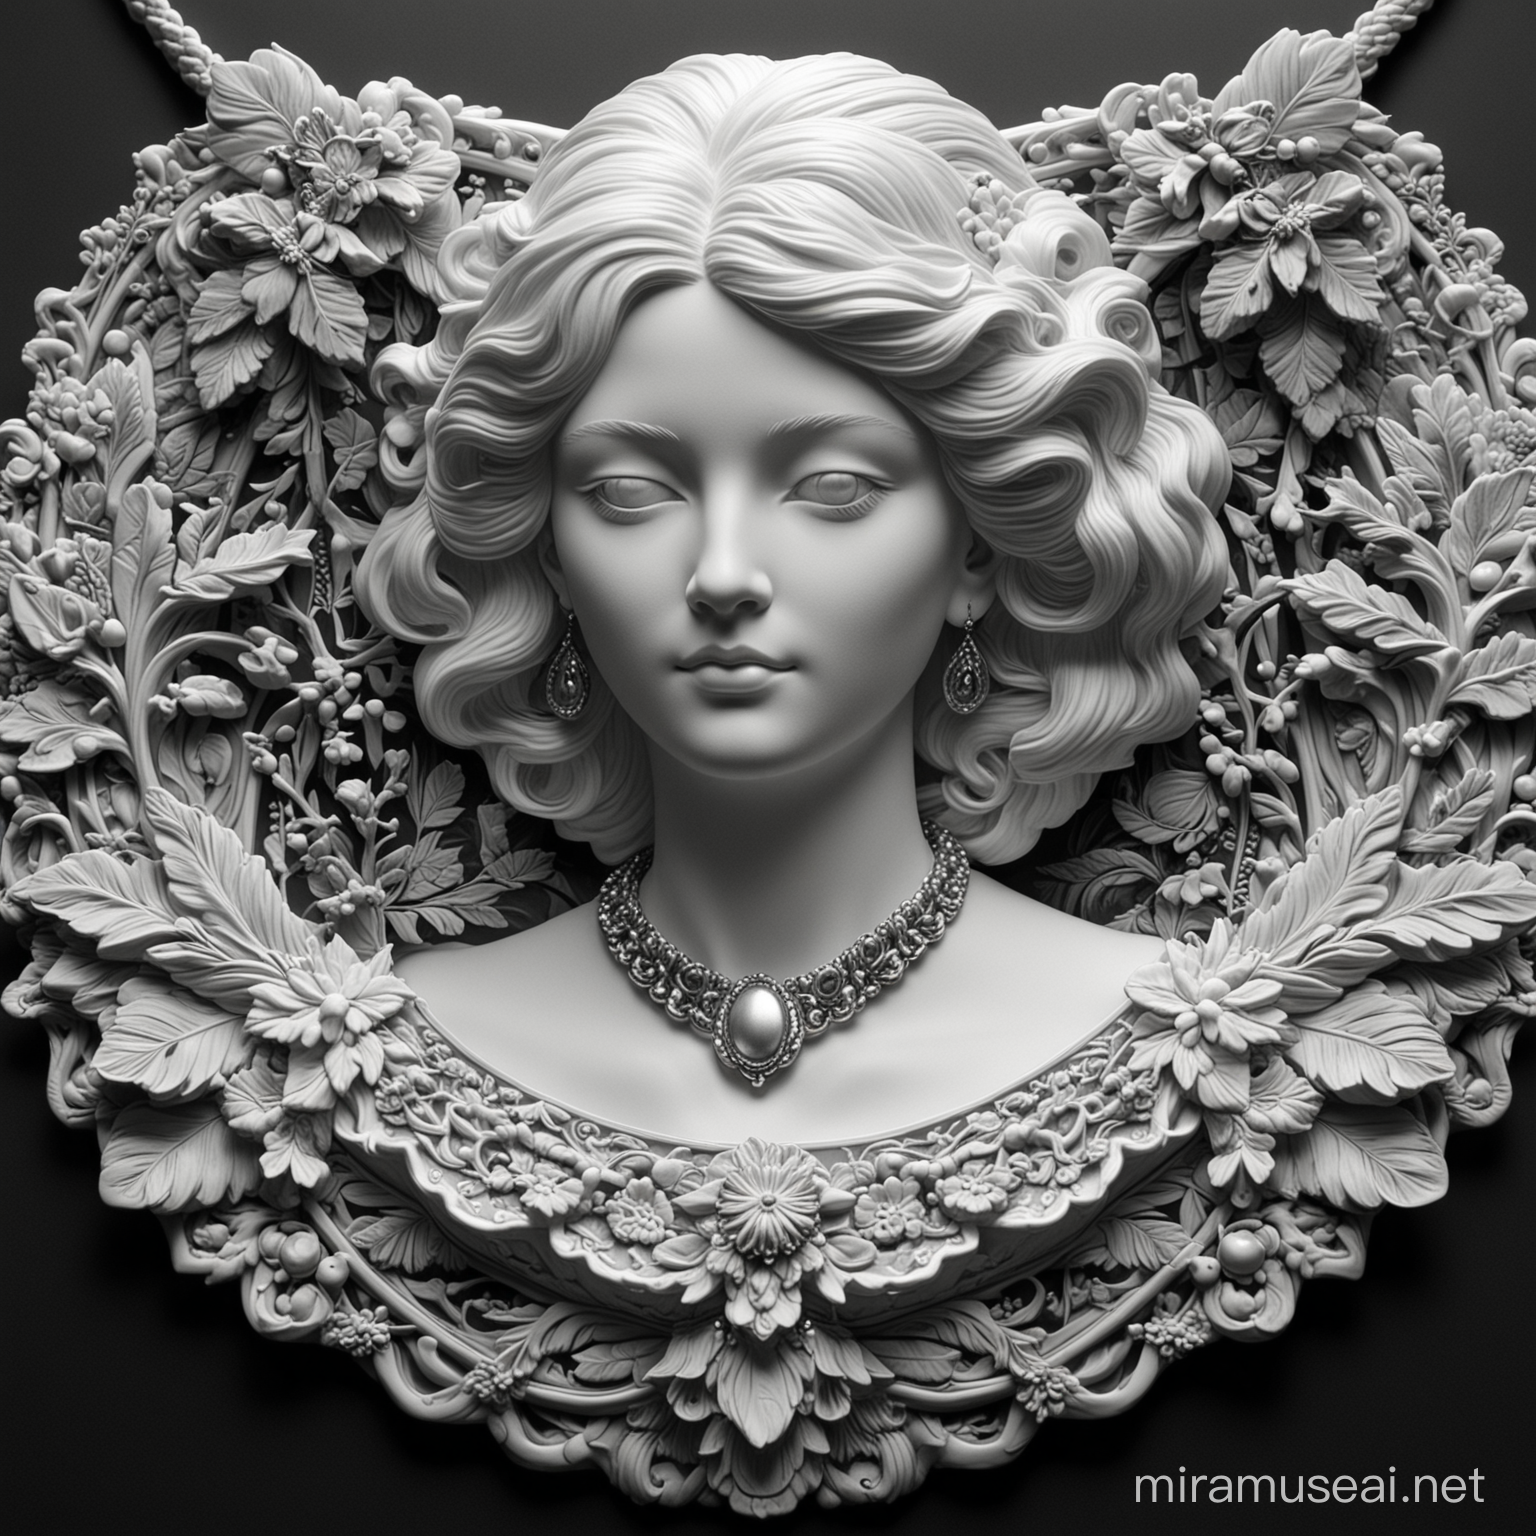 Grayscale Relief Portrait with Cameo Collar High Detail and Contrast